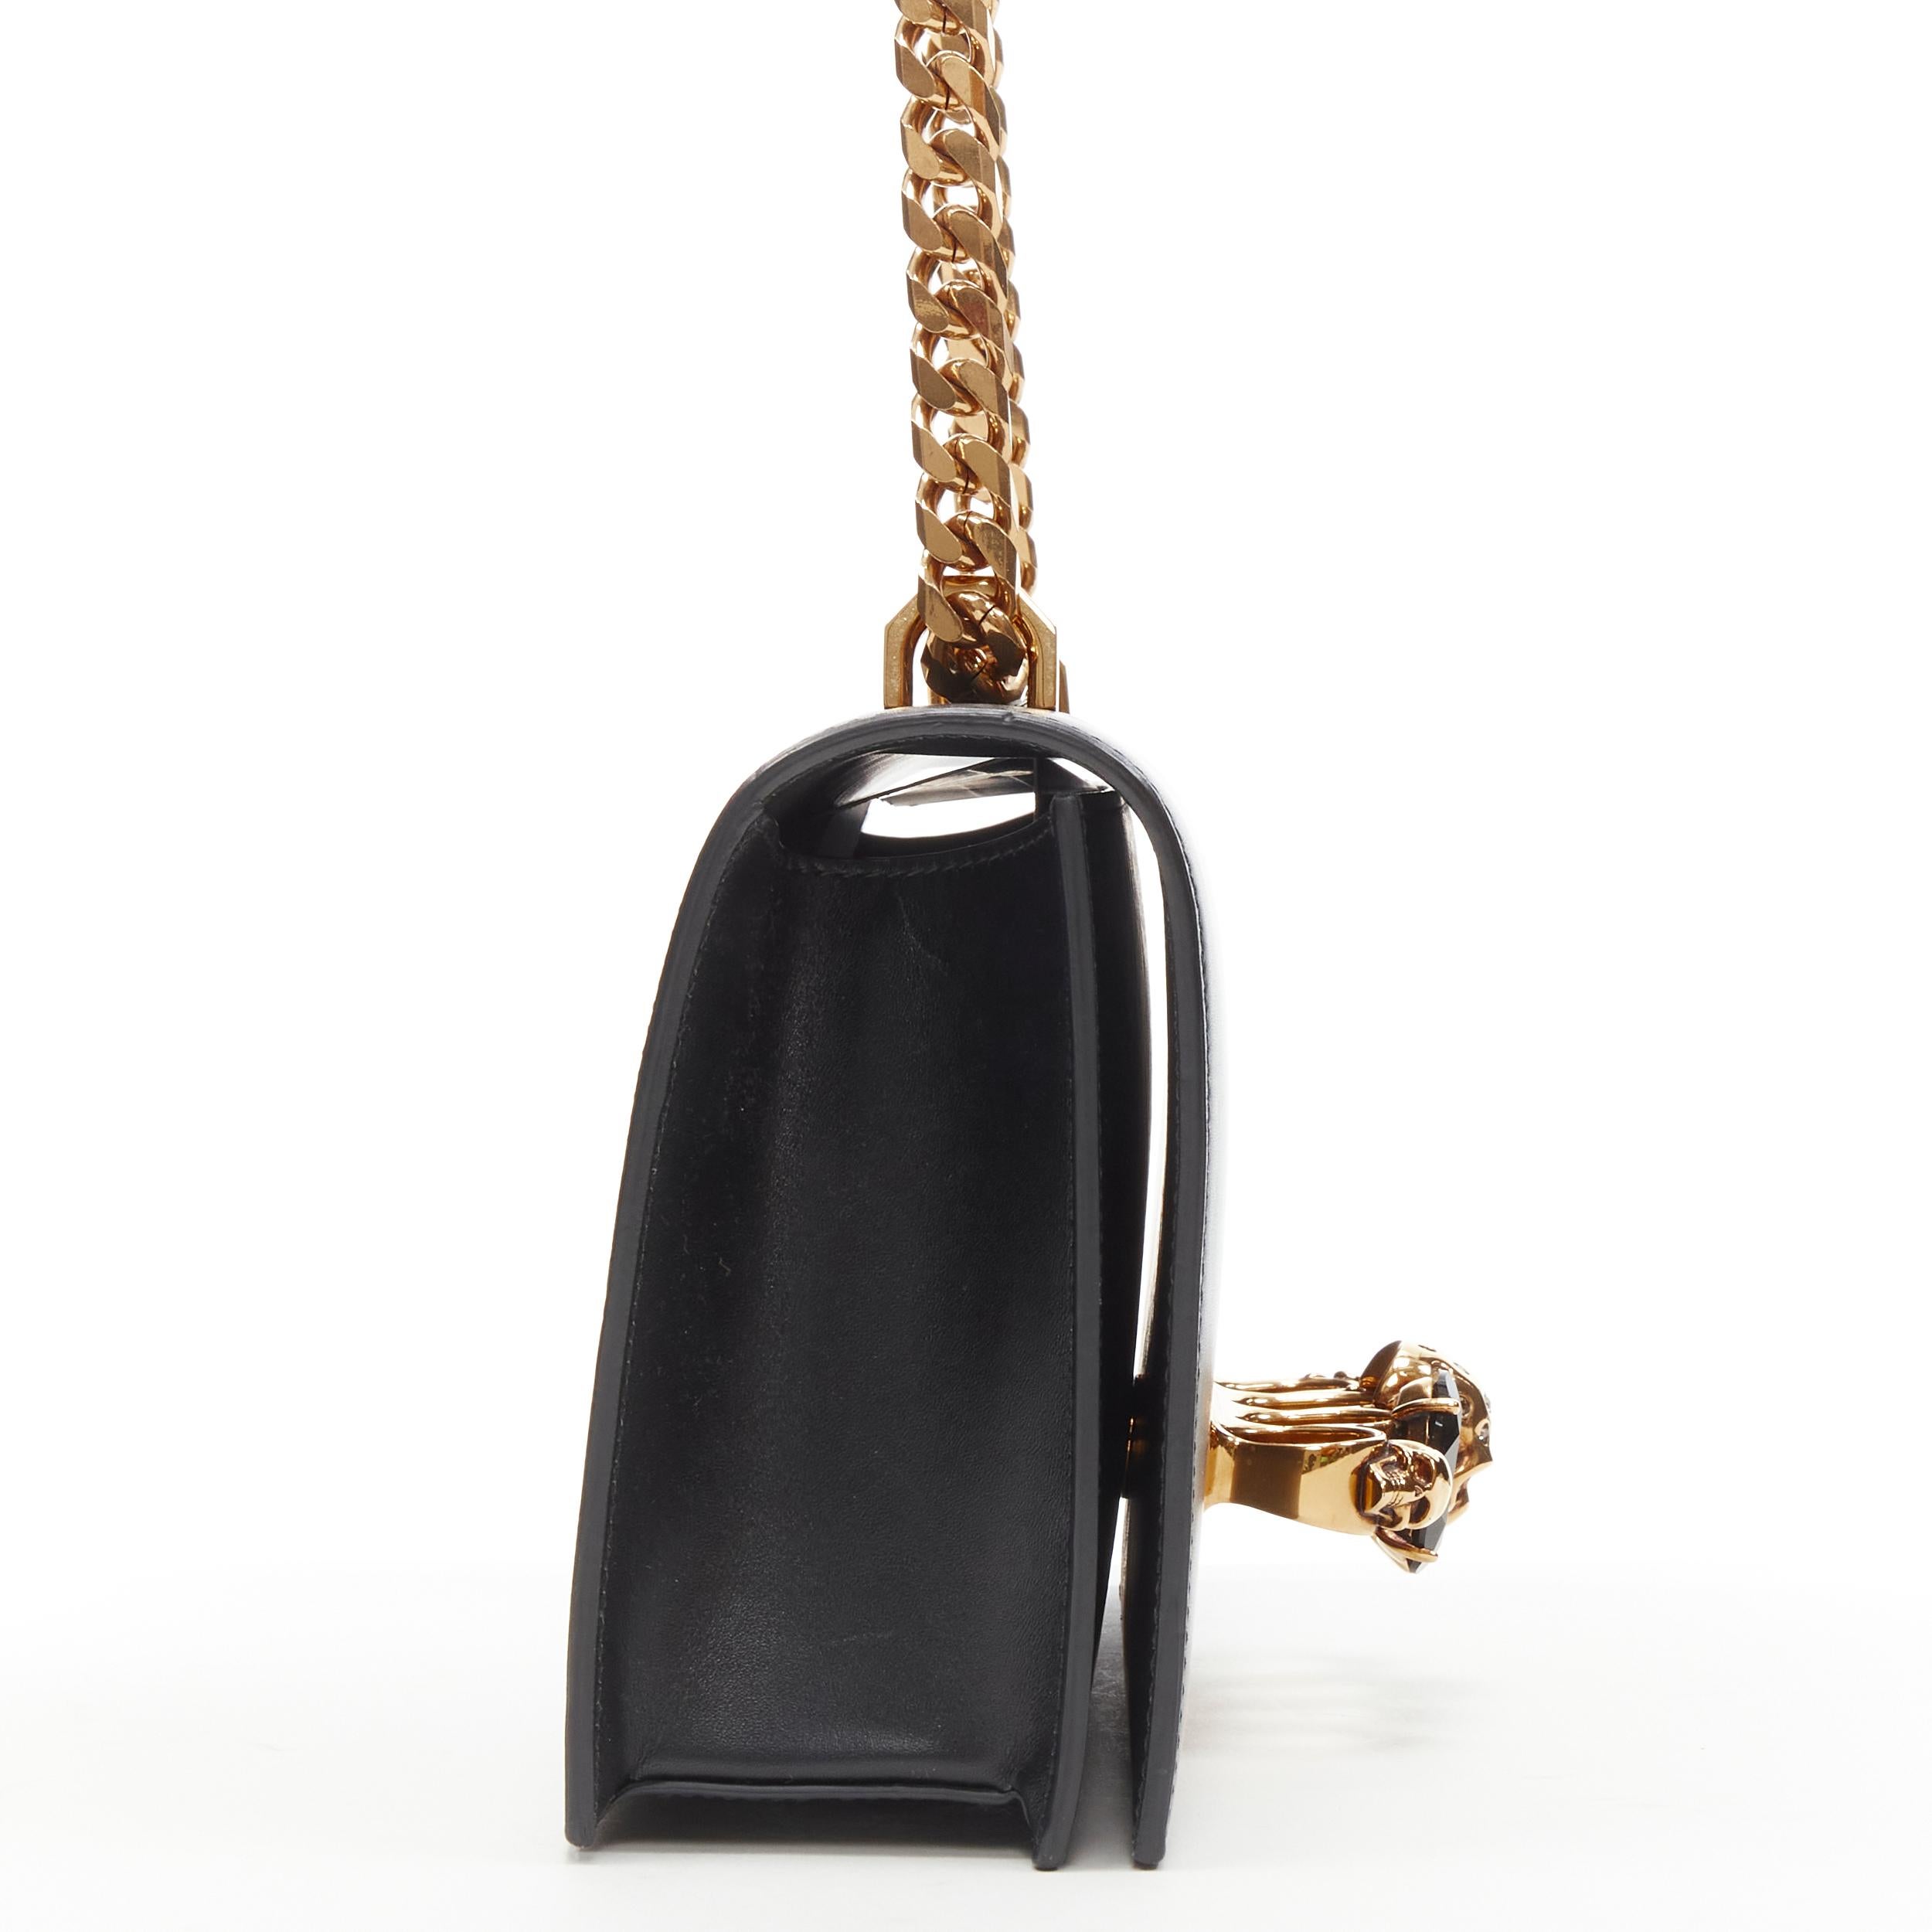 Black A:EXANDER MCQUEEN Knuckle Duster gold Skull jewel black gold chain  bag